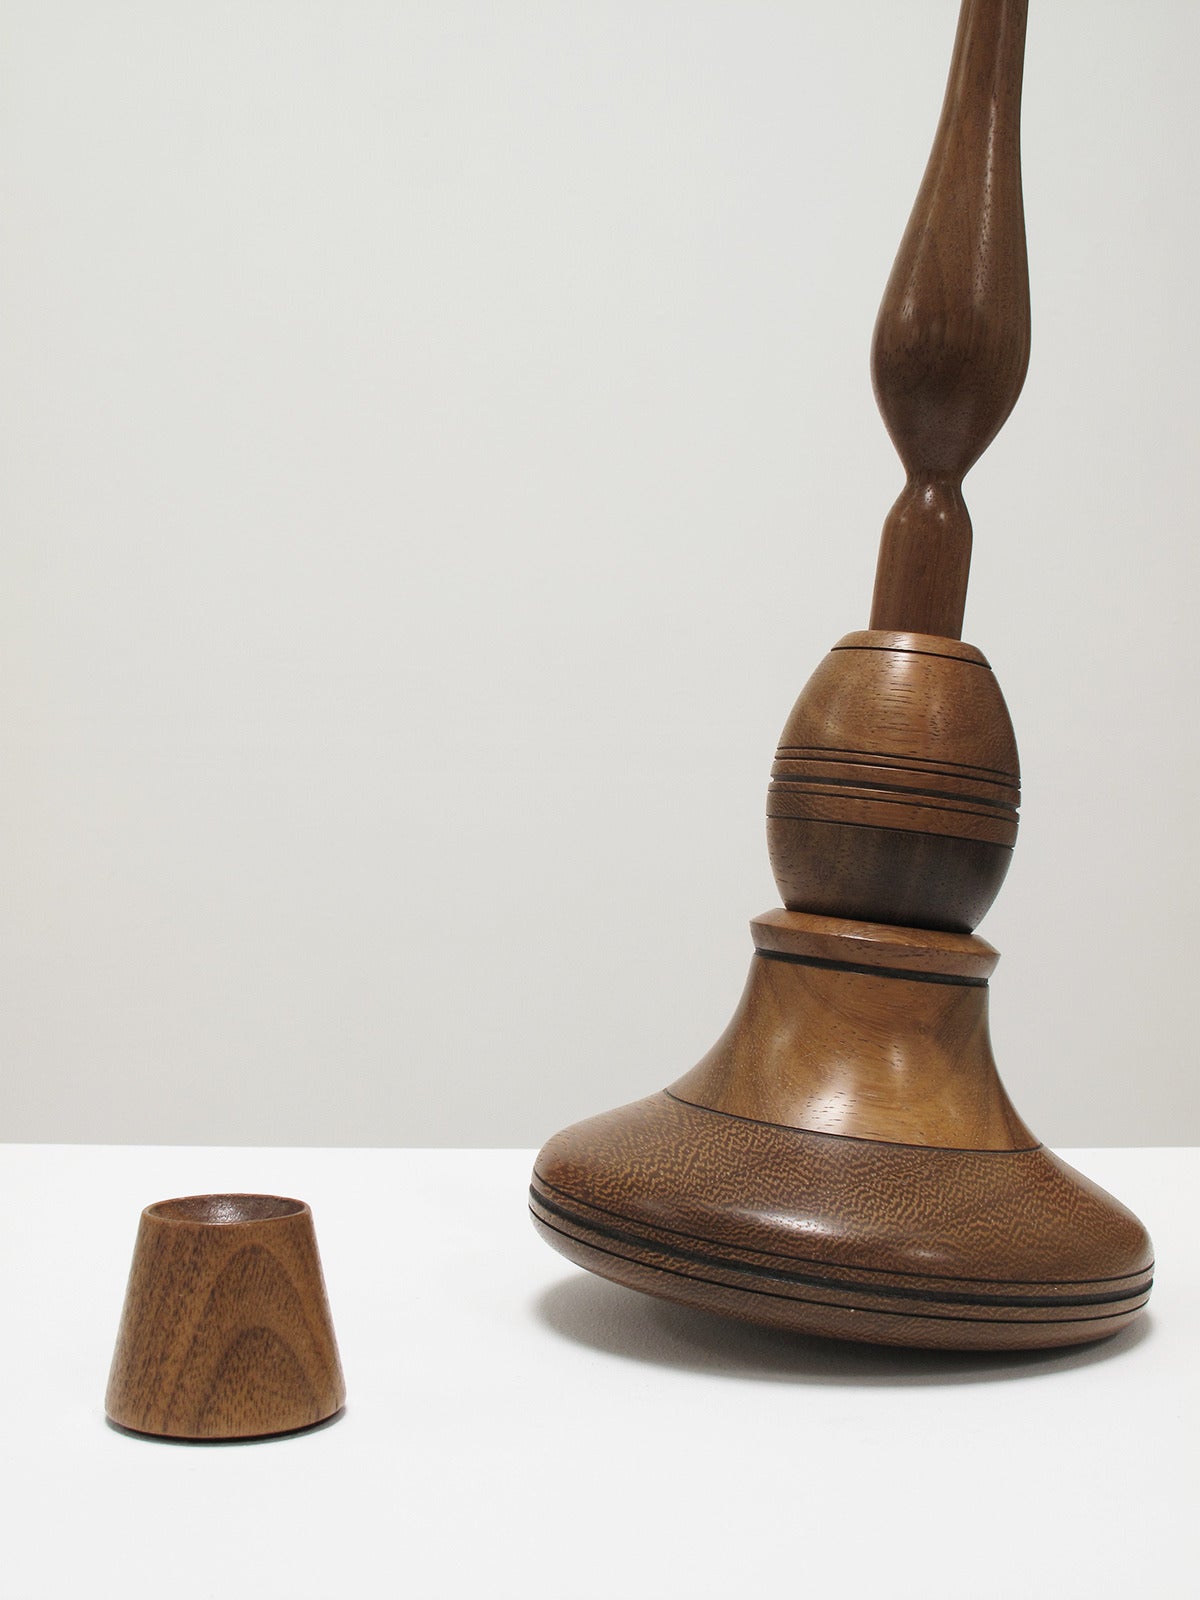 Solid Wood Spinning Top Sculpture by Richard Patterson In Excellent Condition For Sale In Los Angeles, CA